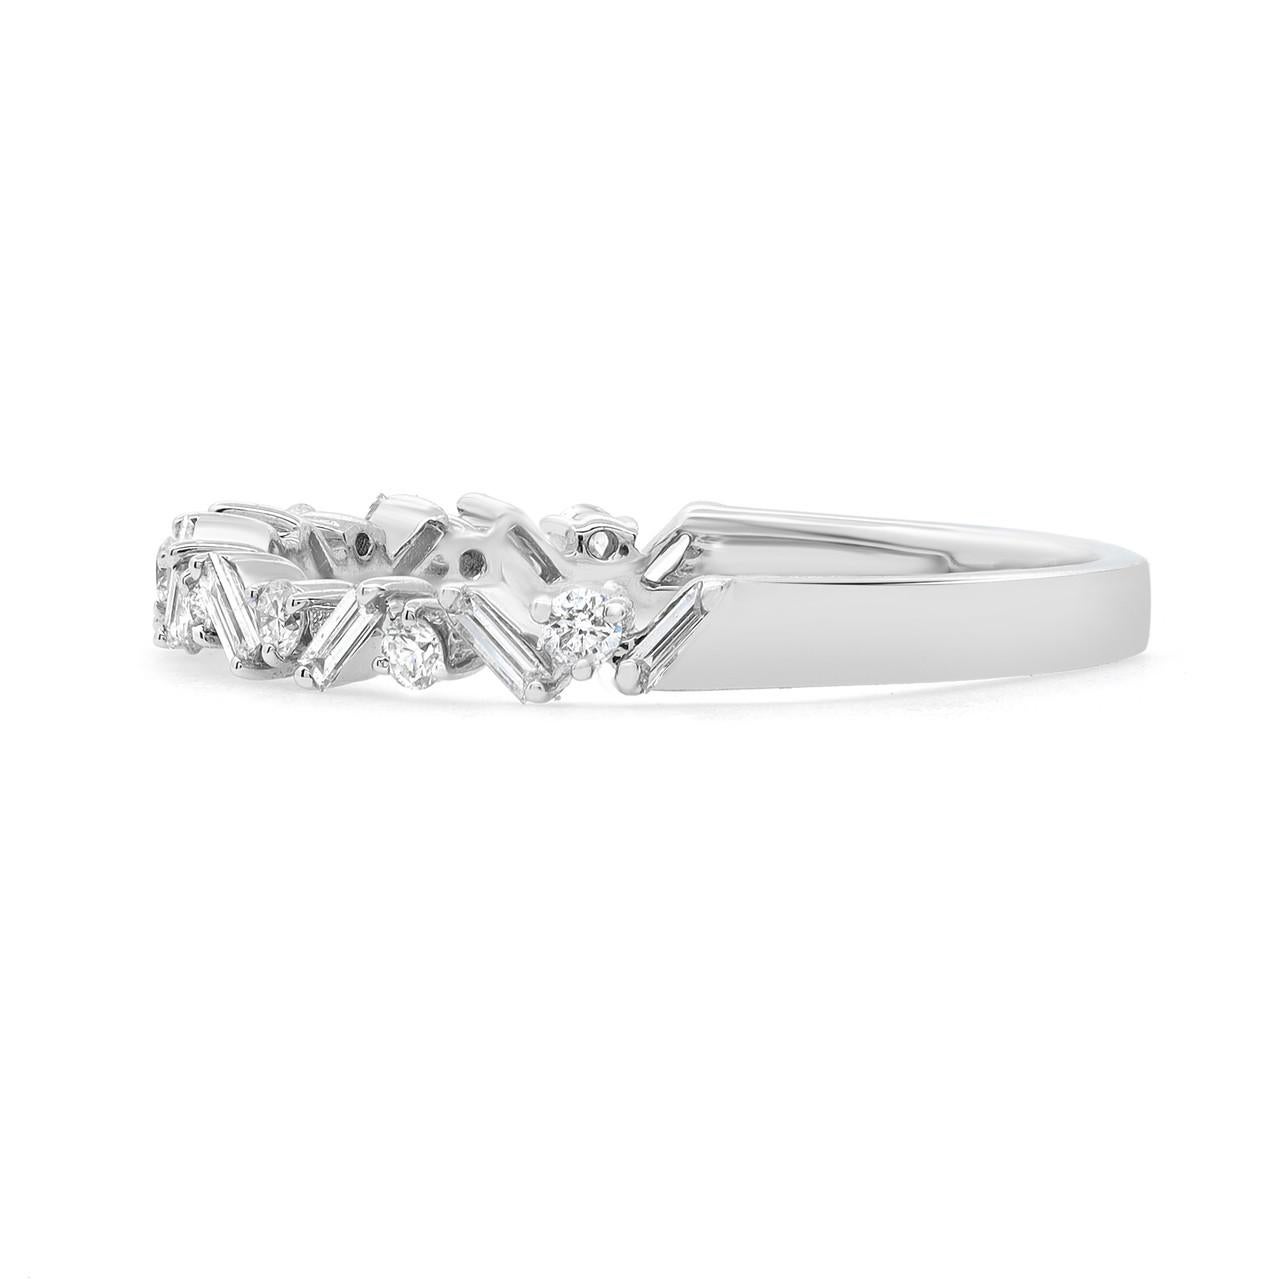 Introducing our breathtaking 0.30 Carat Baguette & Round Cut Diamond Ring in 18K White Gold. This stunning piece showcases a captivating array of diamond shapes, including princess round and baguette cuts, meticulously arranged in a dot dash